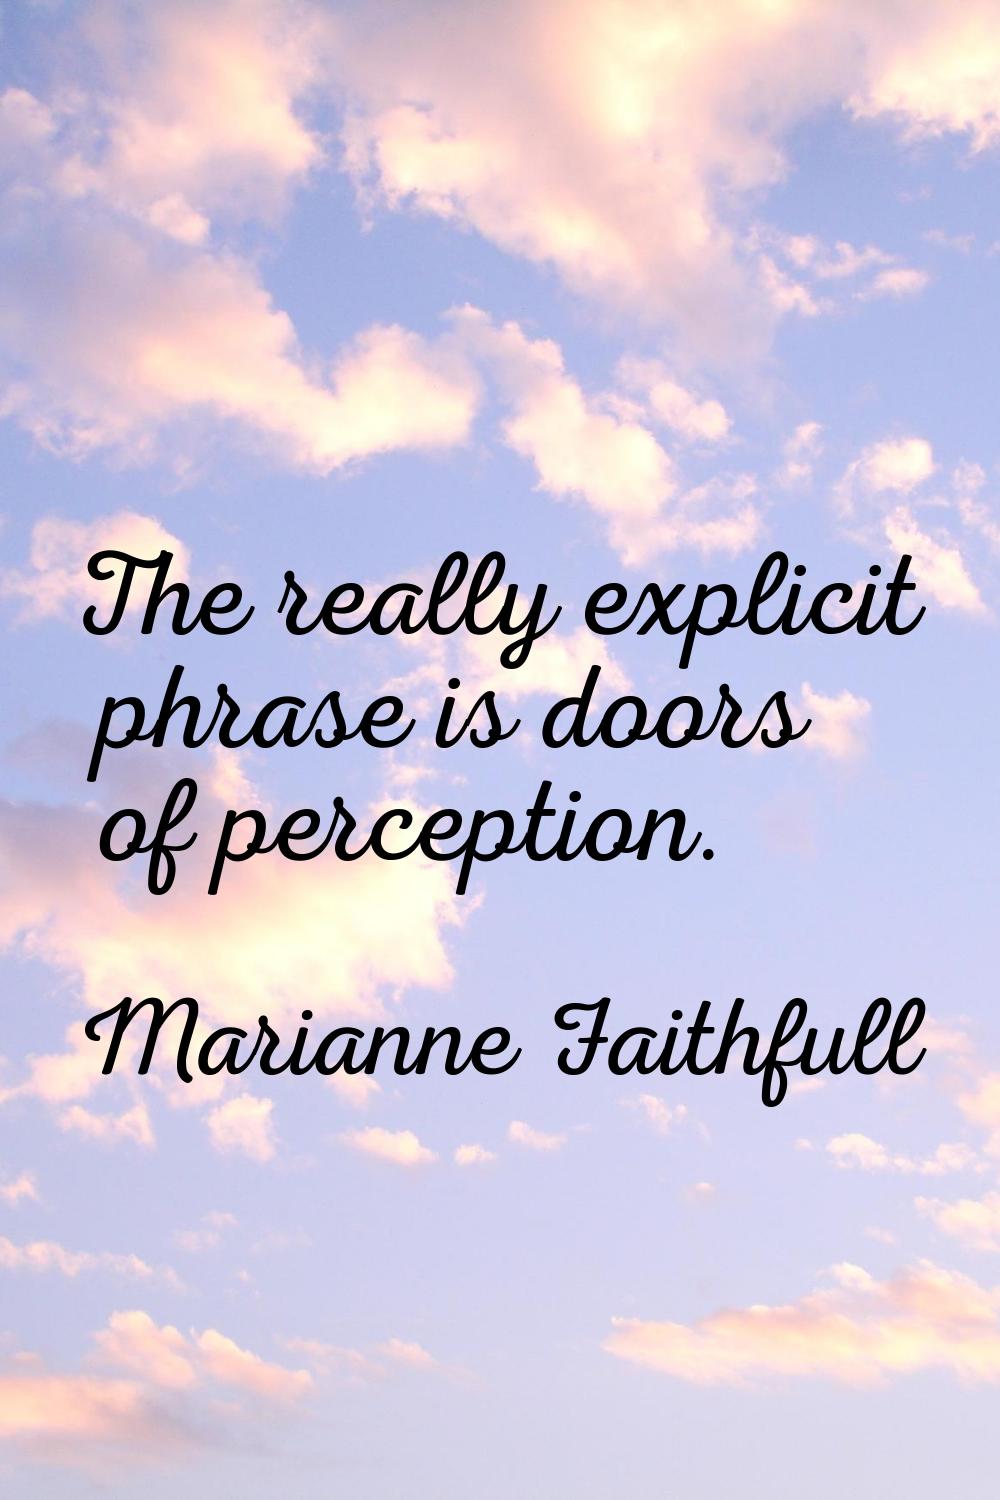 The really explicit phrase is doors of perception.